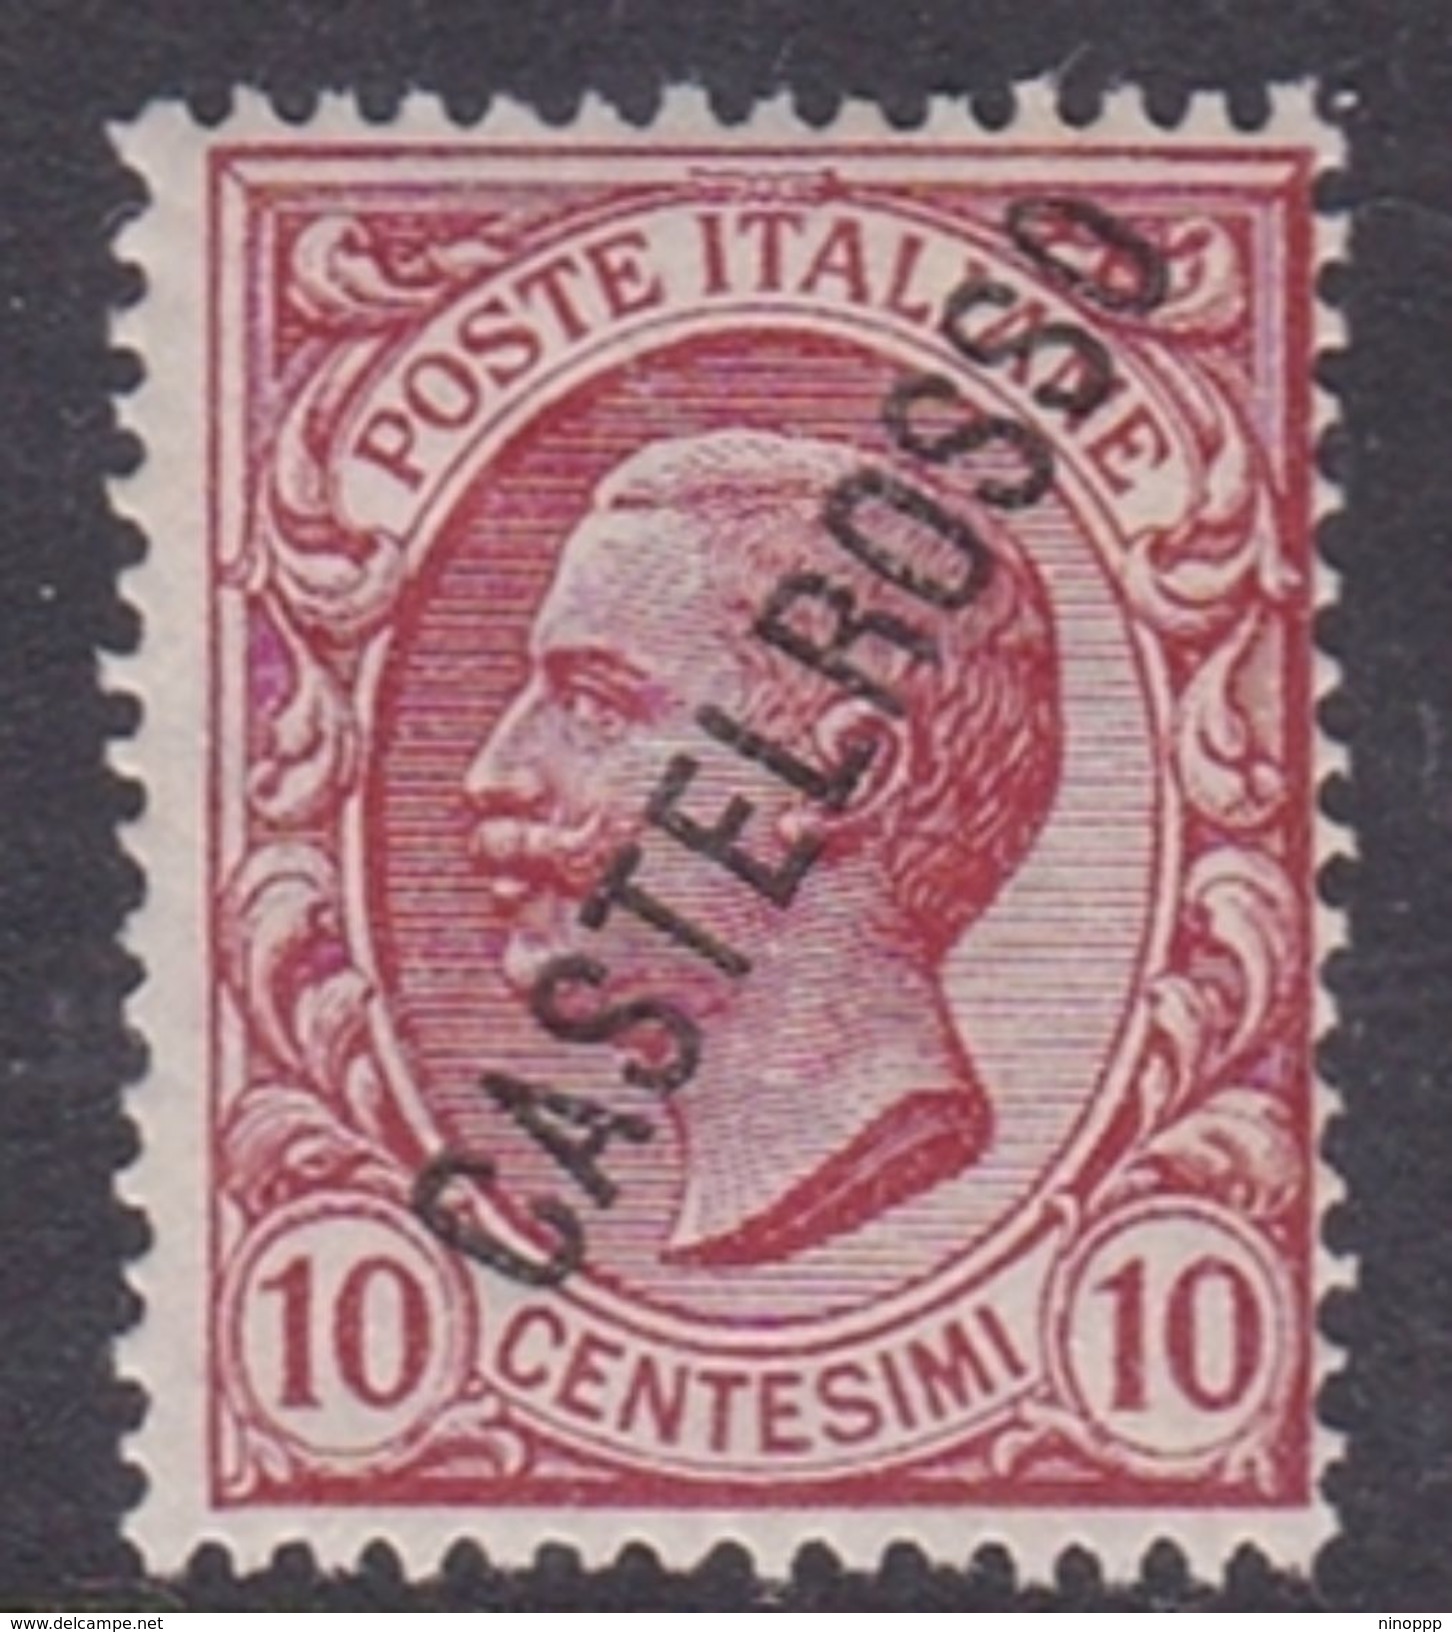 Italy-Colonies And Territories-Castelrosso S16 1924 10c Rose MNH - Amtliche Ausgaben